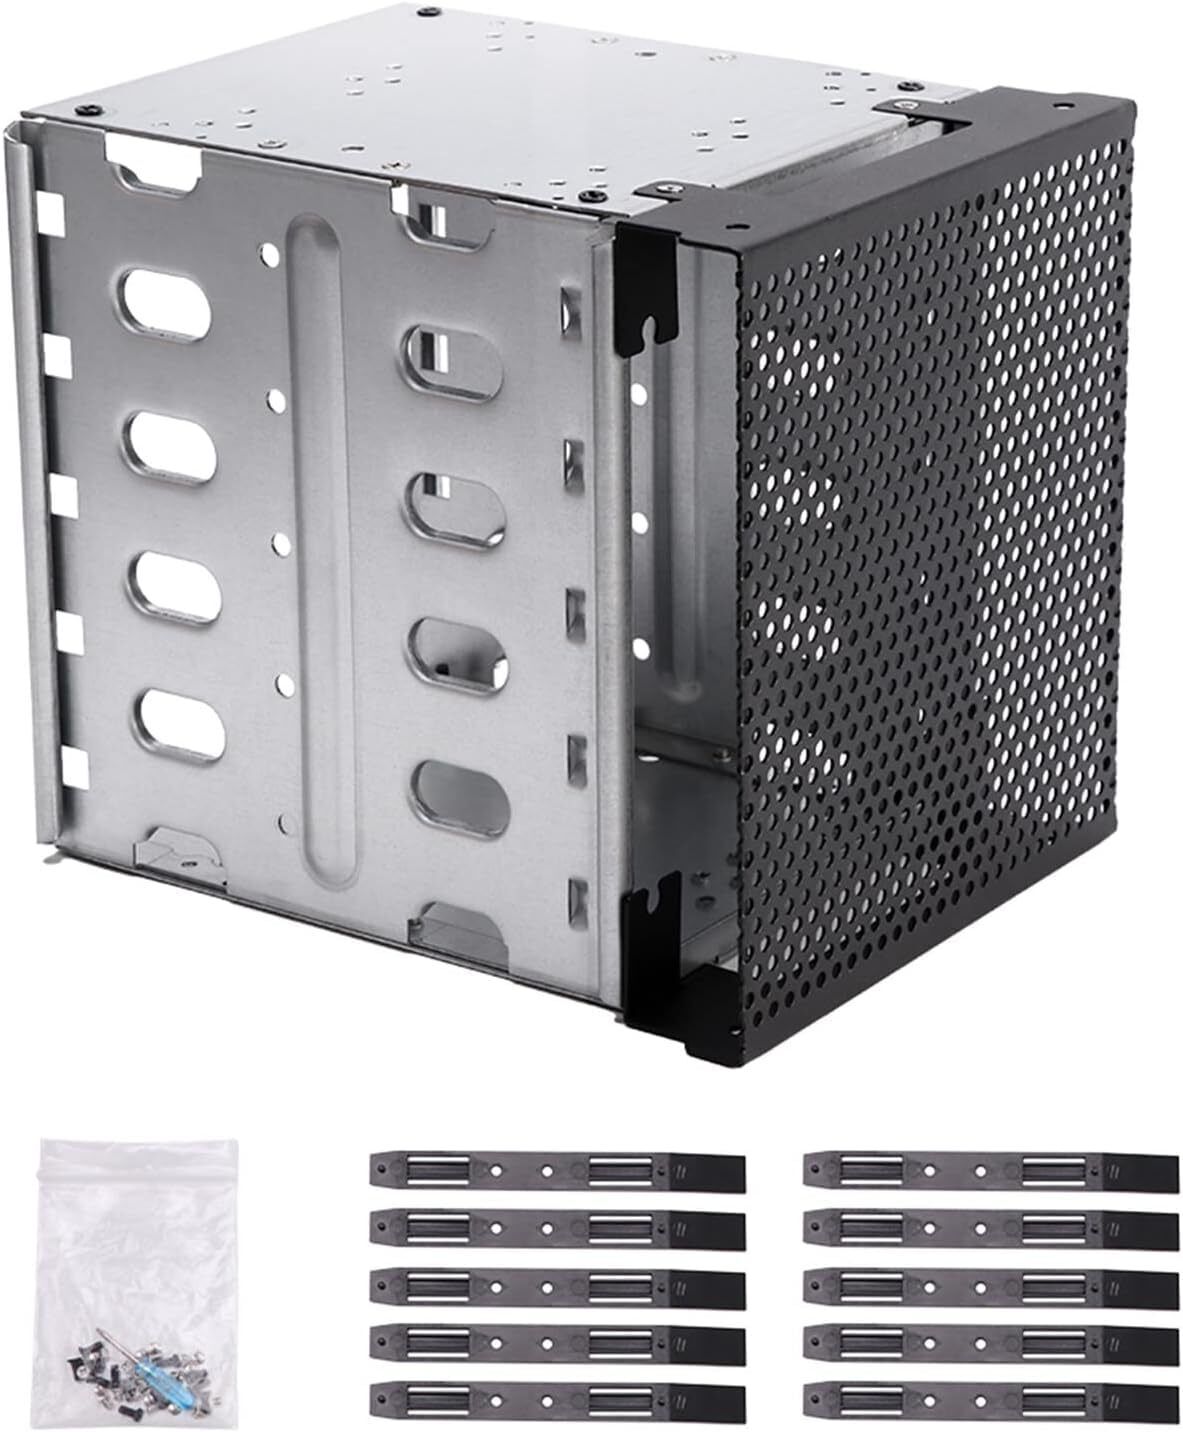 Stainless Steel Hard Drive Cage, 5.25